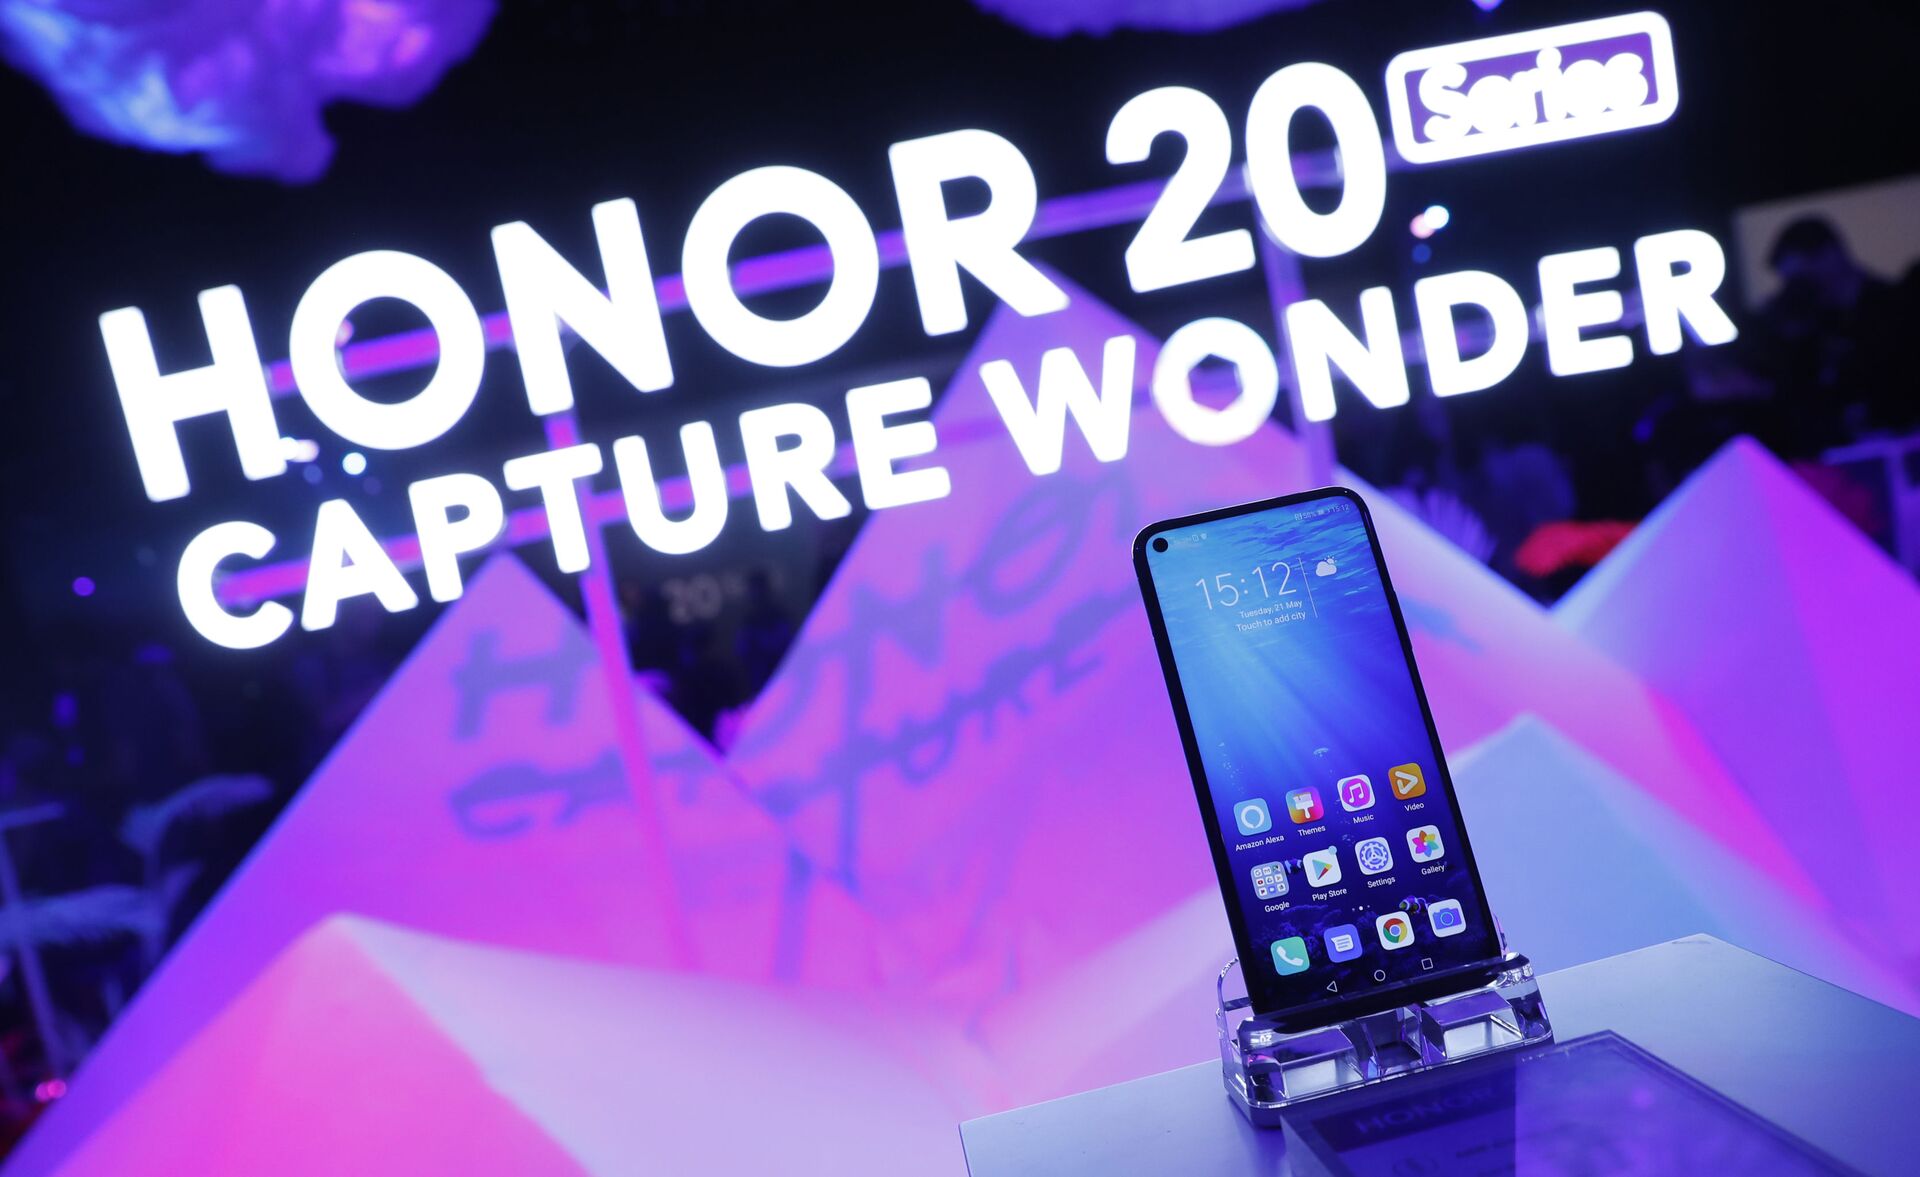 Members of the invited audience of fans and media try out the new Honor 20 series of phones following their global launch in London, Tuesday, May 21, 2019 - Sputnik International, 1920, 07.09.2021